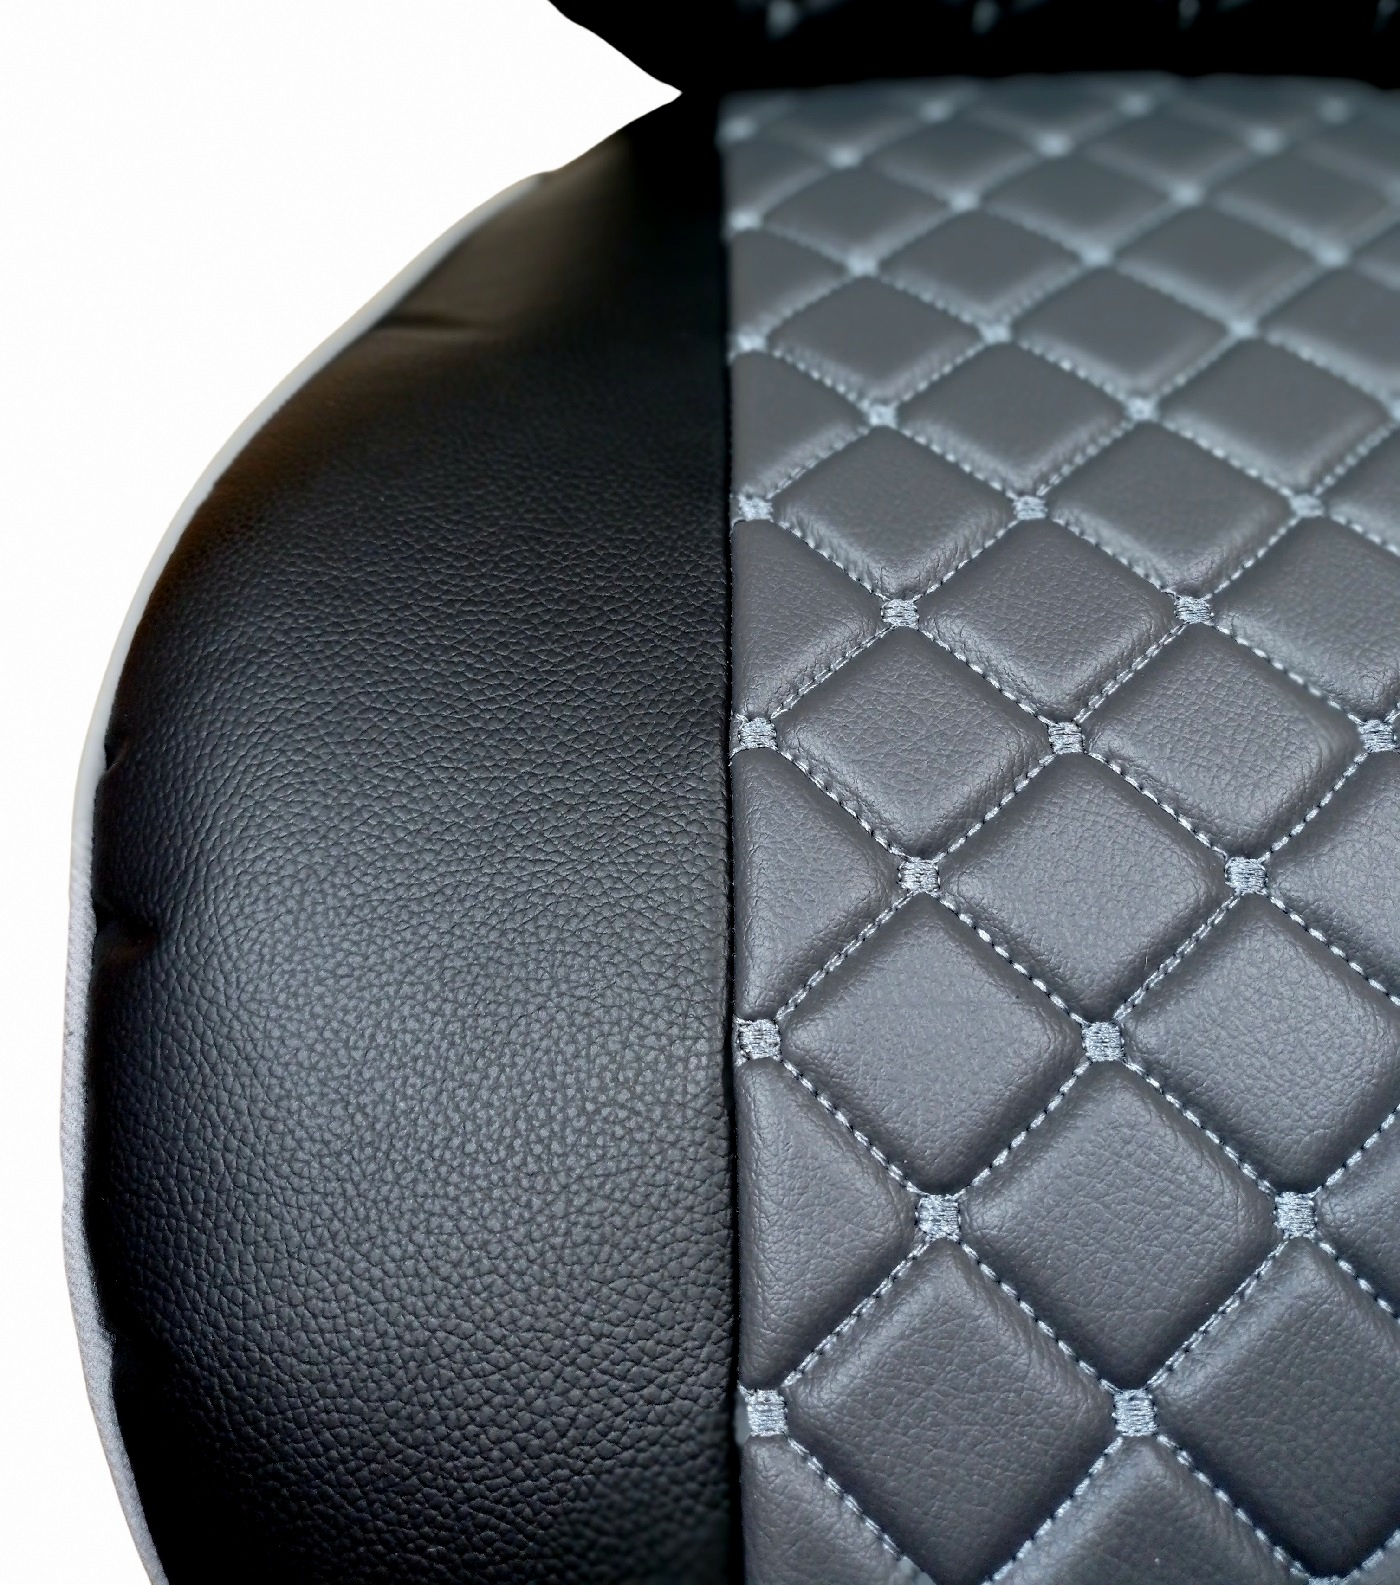 Seat covers for Volvo FH EURO 5 2006-2015 Truck Black Grey Leather LHD RHD